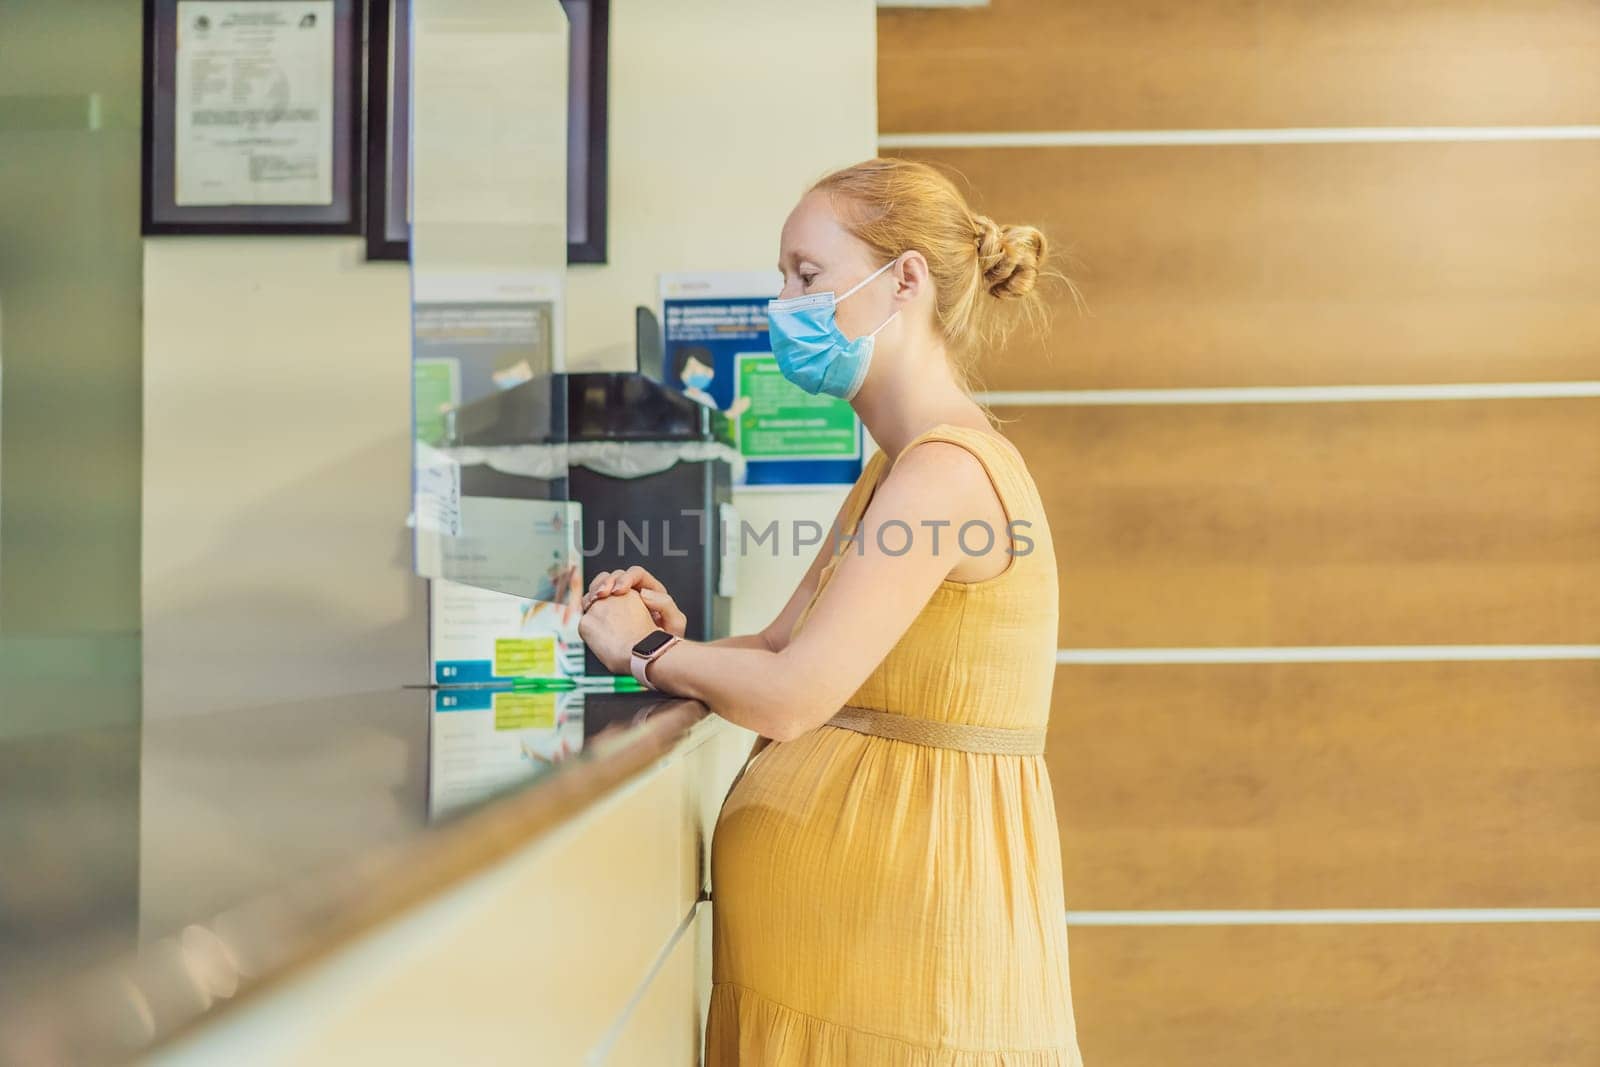 A pregnant woman stands at the hospital reception desk, embarking on a crucial phase of her maternity journey, seeking care and support in a healthcare setting.